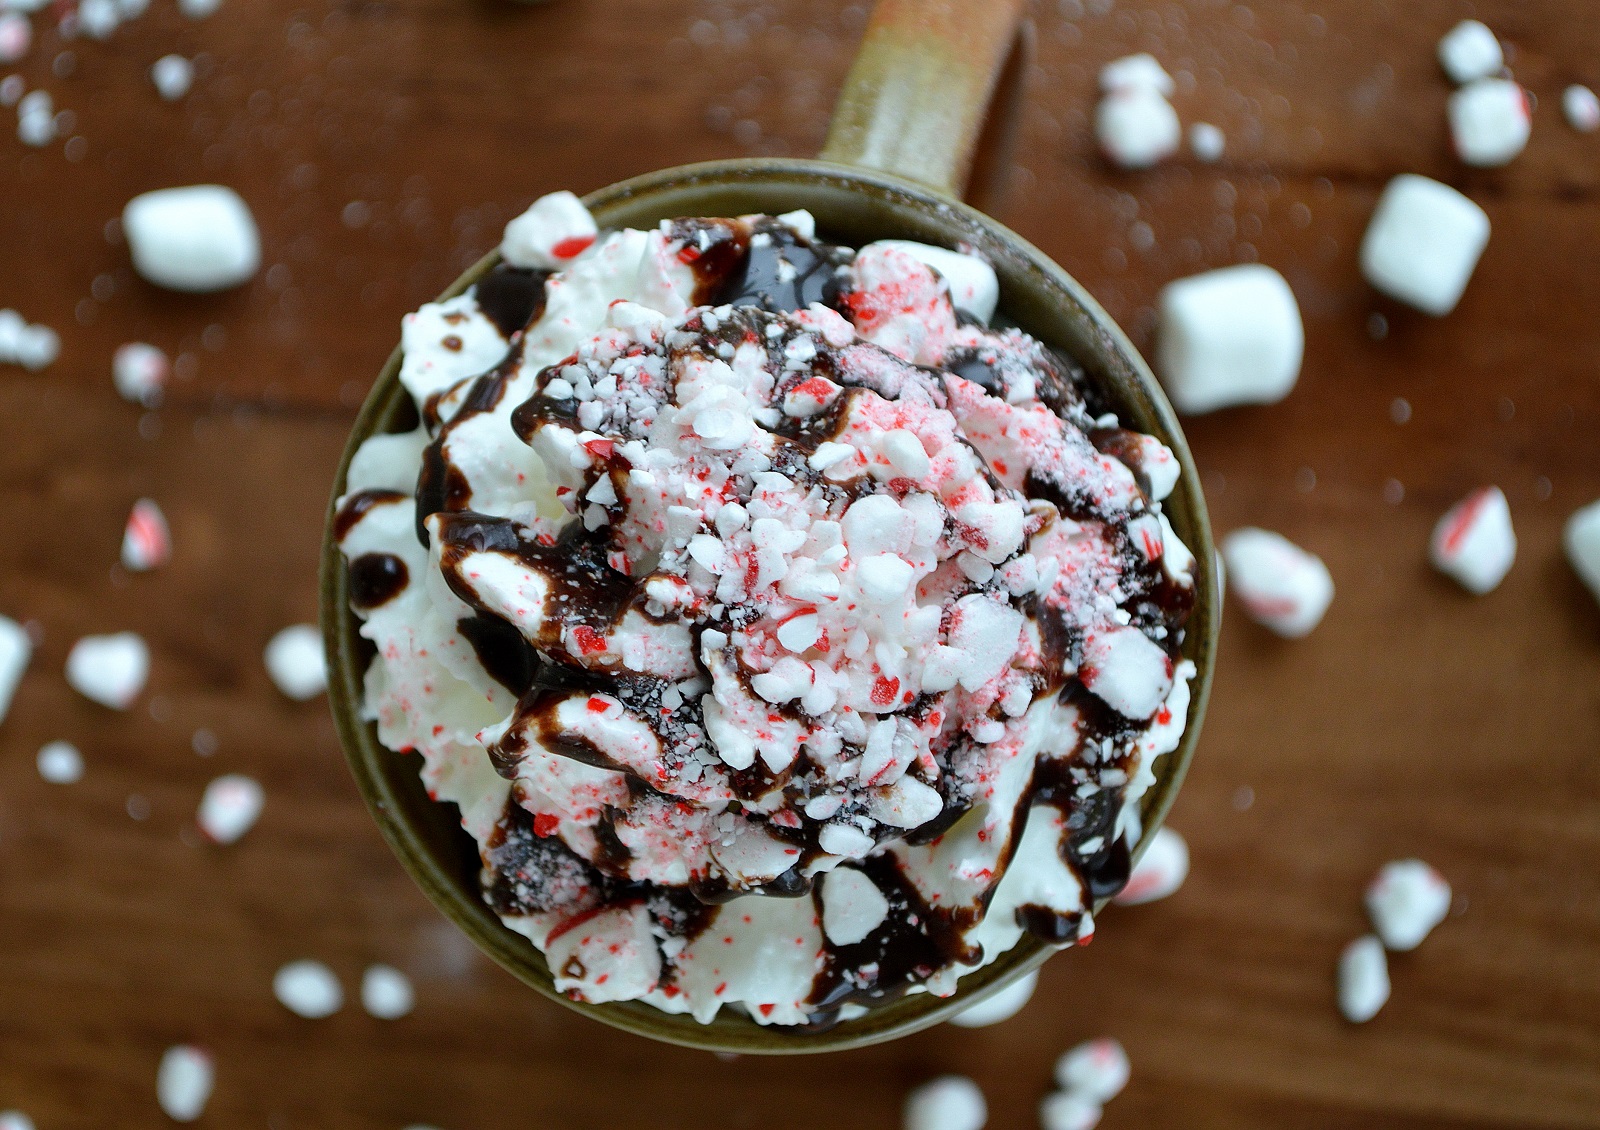 Peppermint Hot Chocolate - Go all out and load your hot chocolate up! 